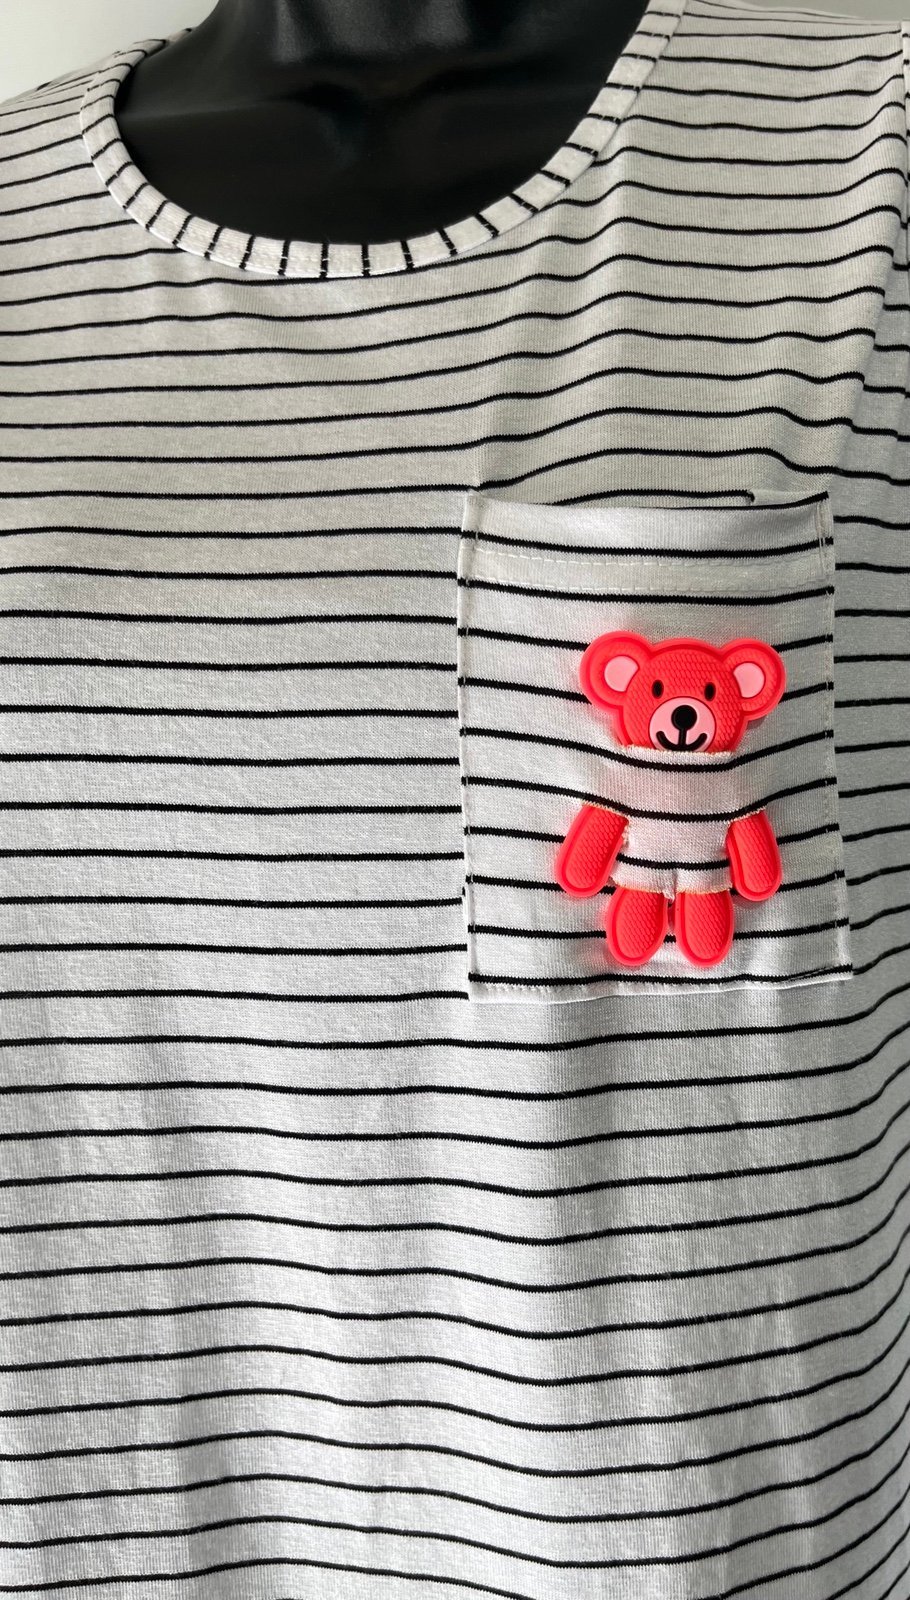 The Best Seller Arcan Womens Black & White Stripped Top With Pink Teddy Bear Size S-M NWT jcatkyCnj Cheap